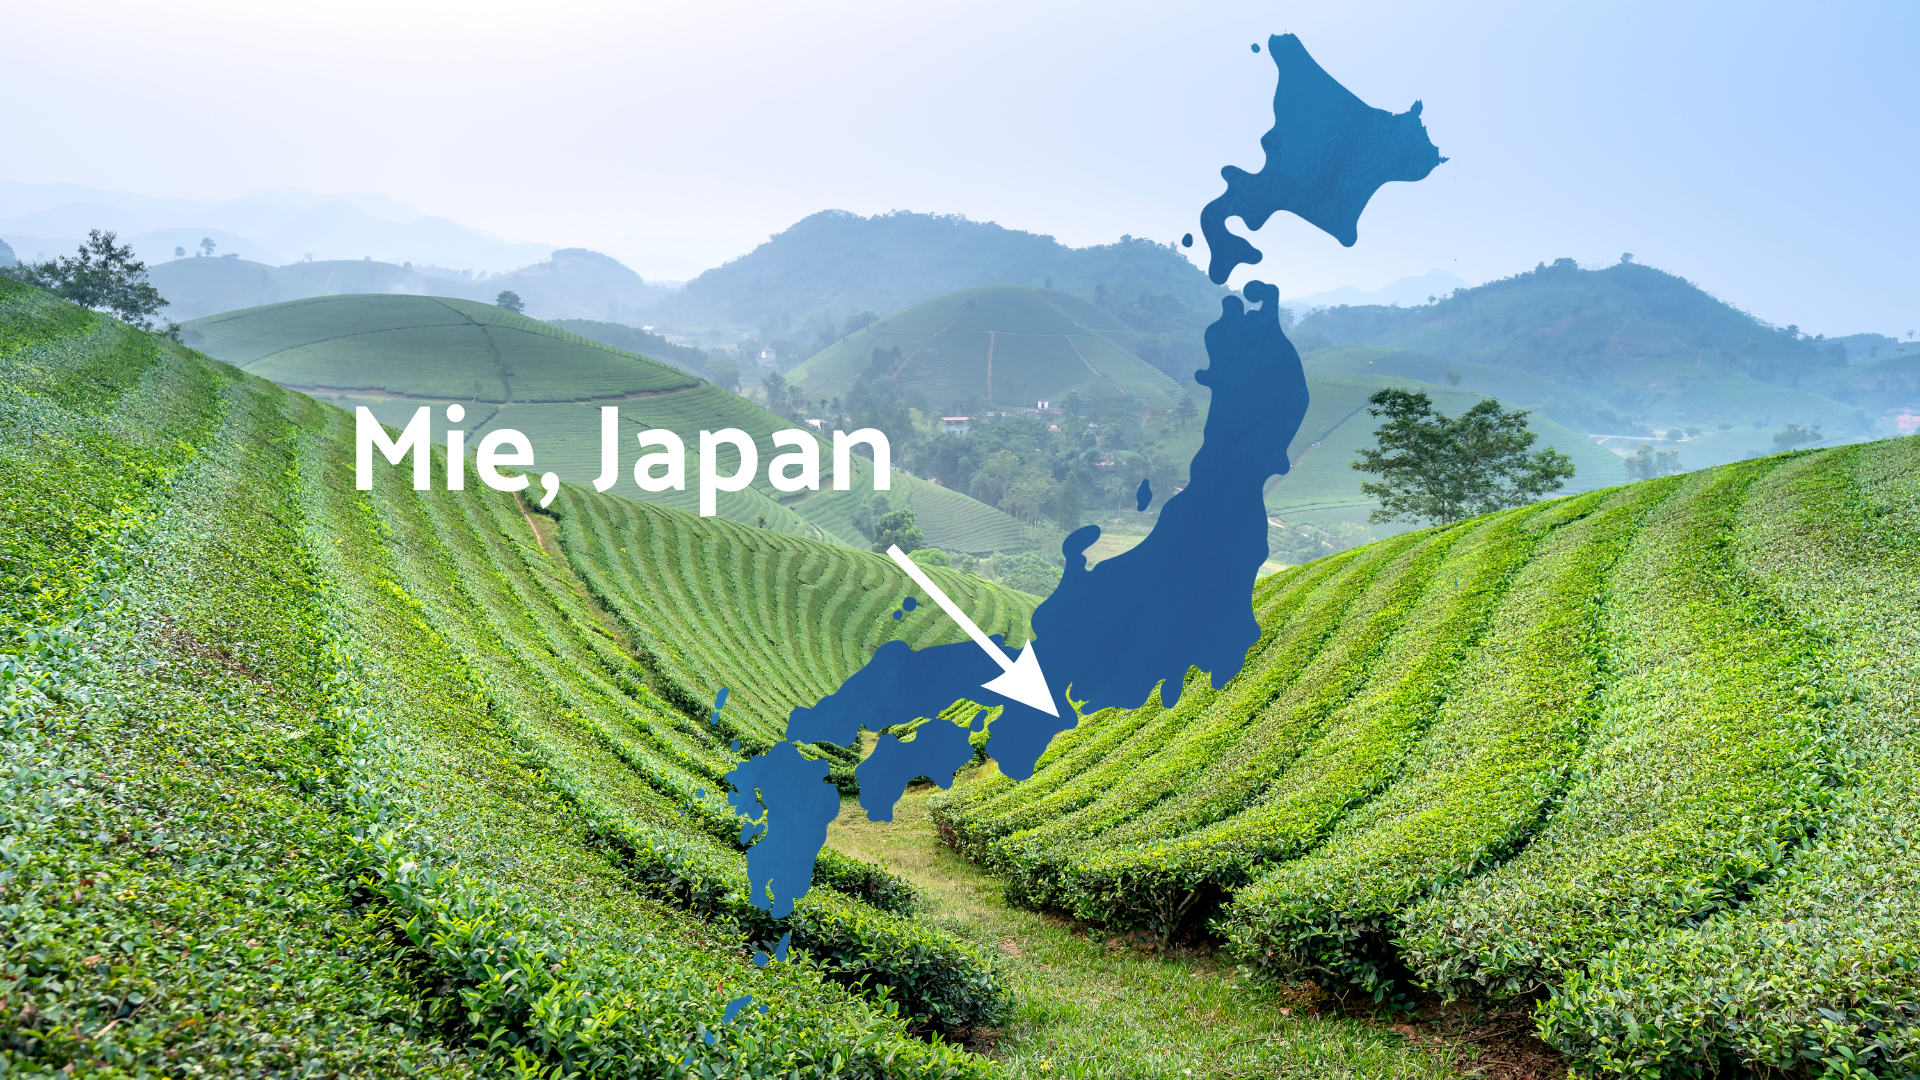 Green tea farm with a map of Mie in Japan